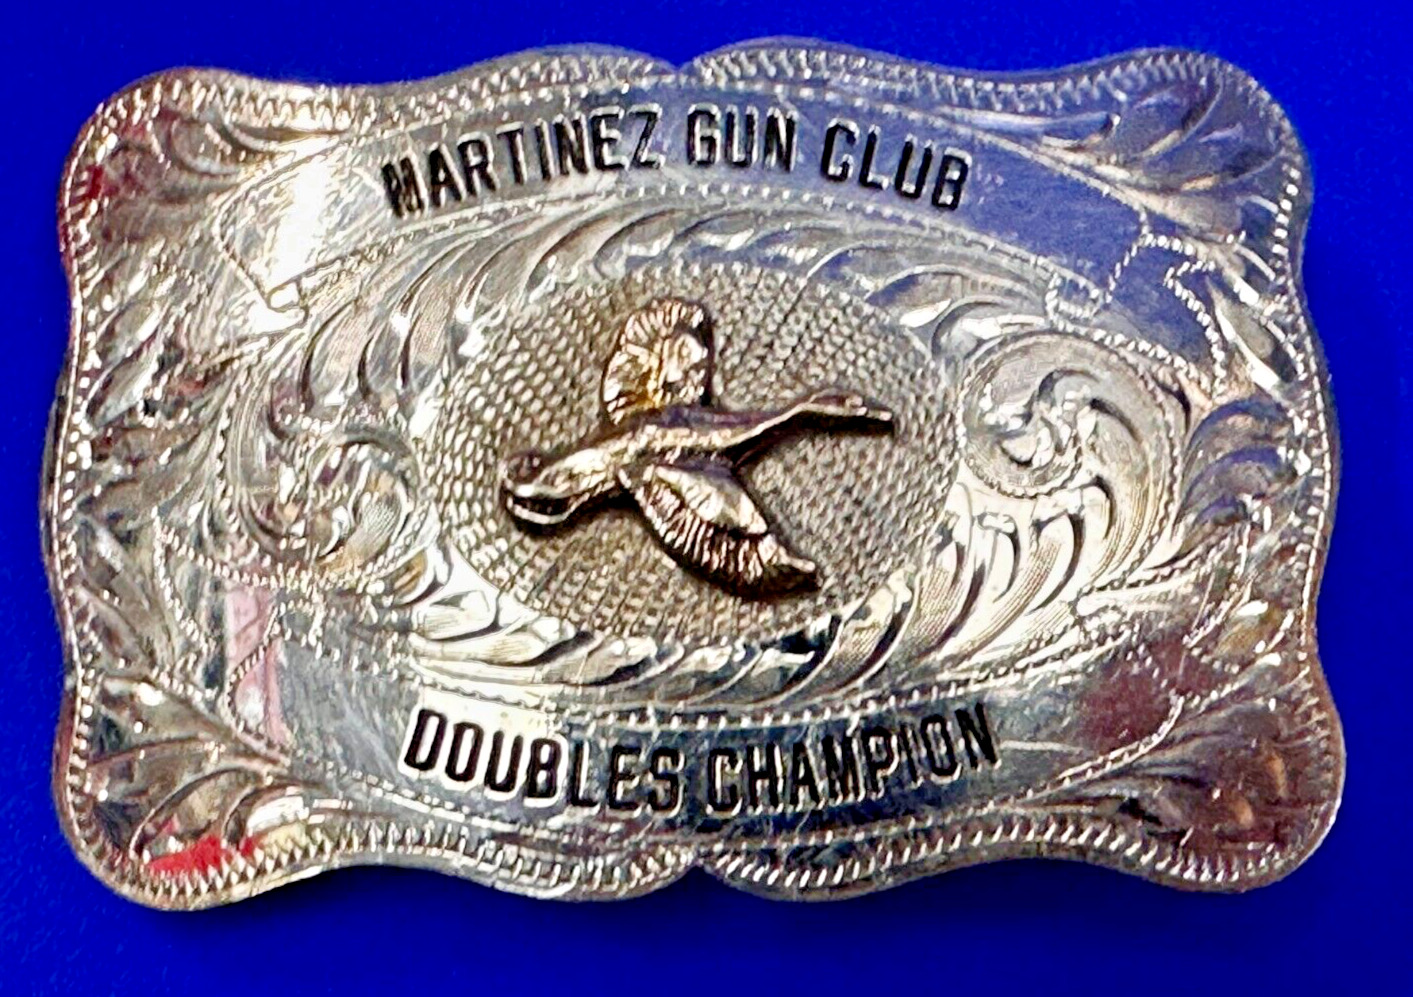 Martinez Gun Club Duck hunting Doubles Champion Trophy Sterling Face Belt Buckle